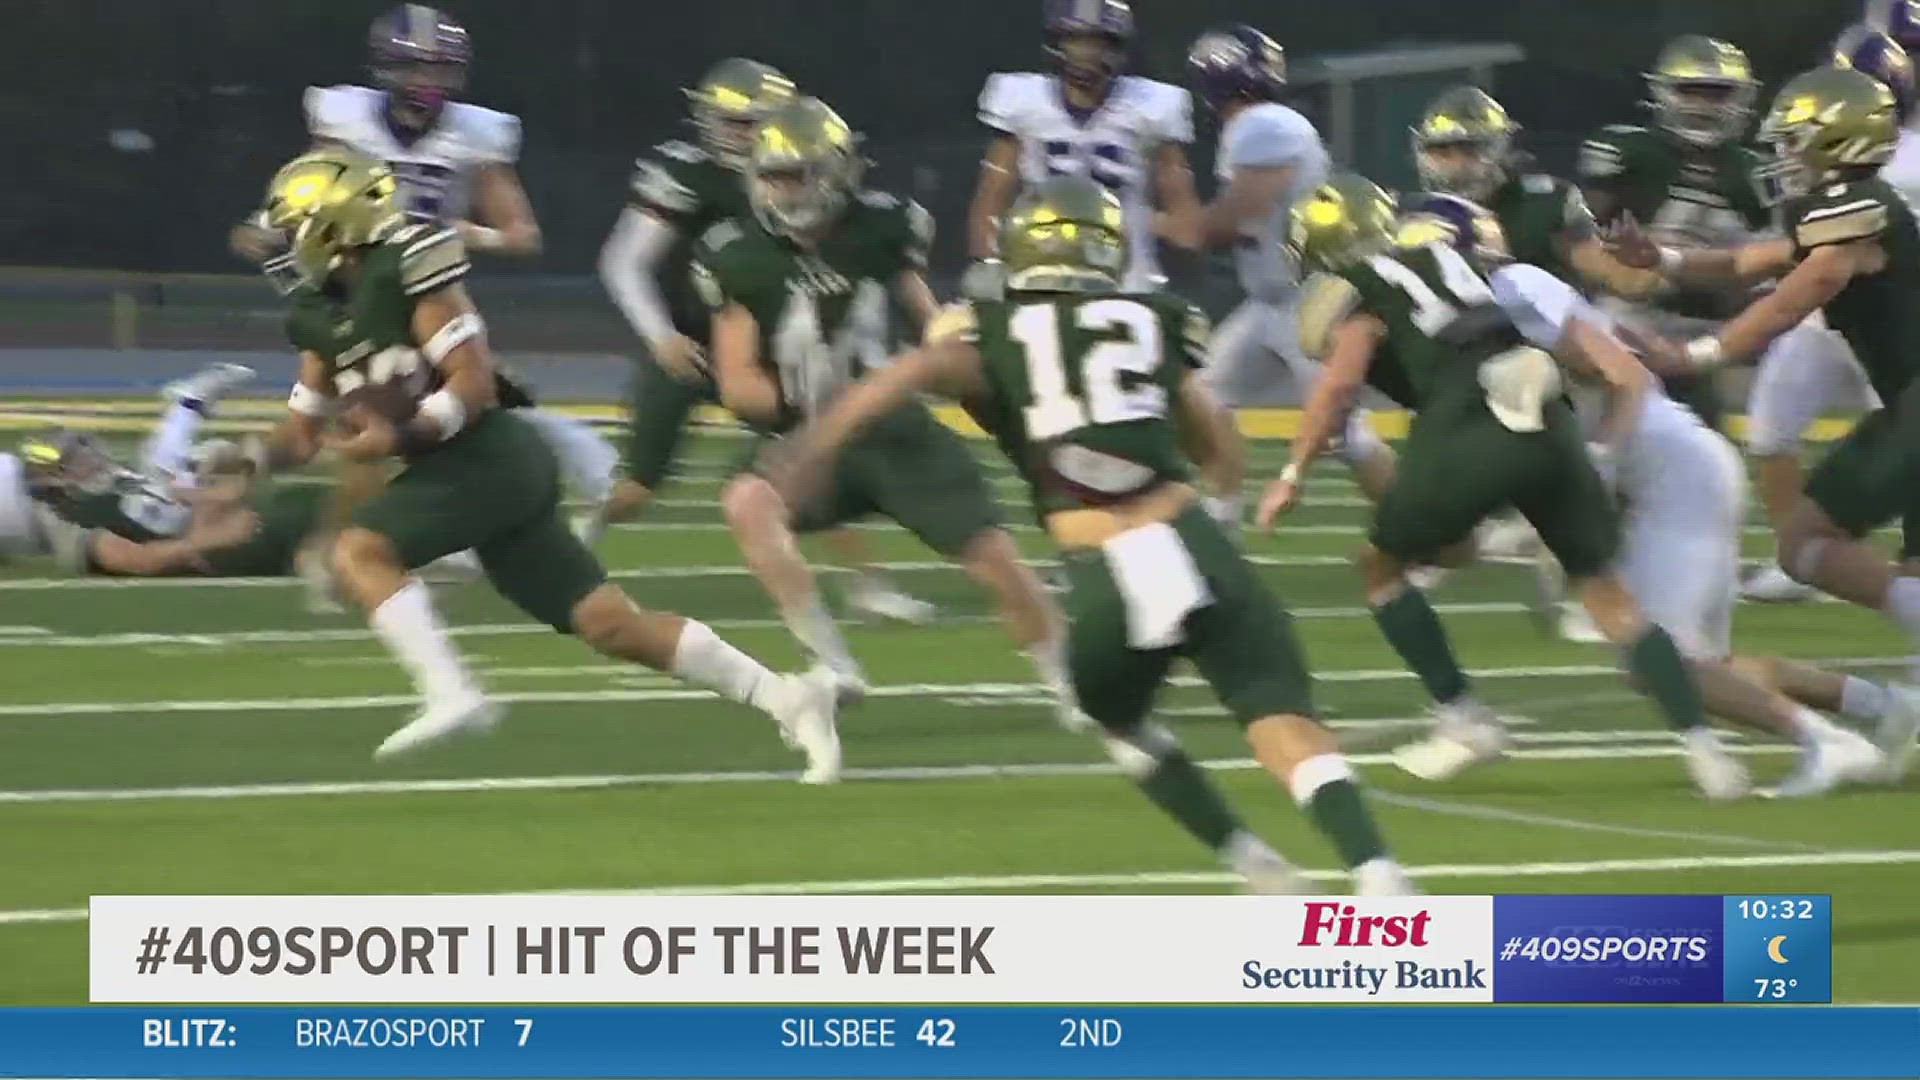 Get all your high school football scores and more at http://12NewsNow.com/Blitz